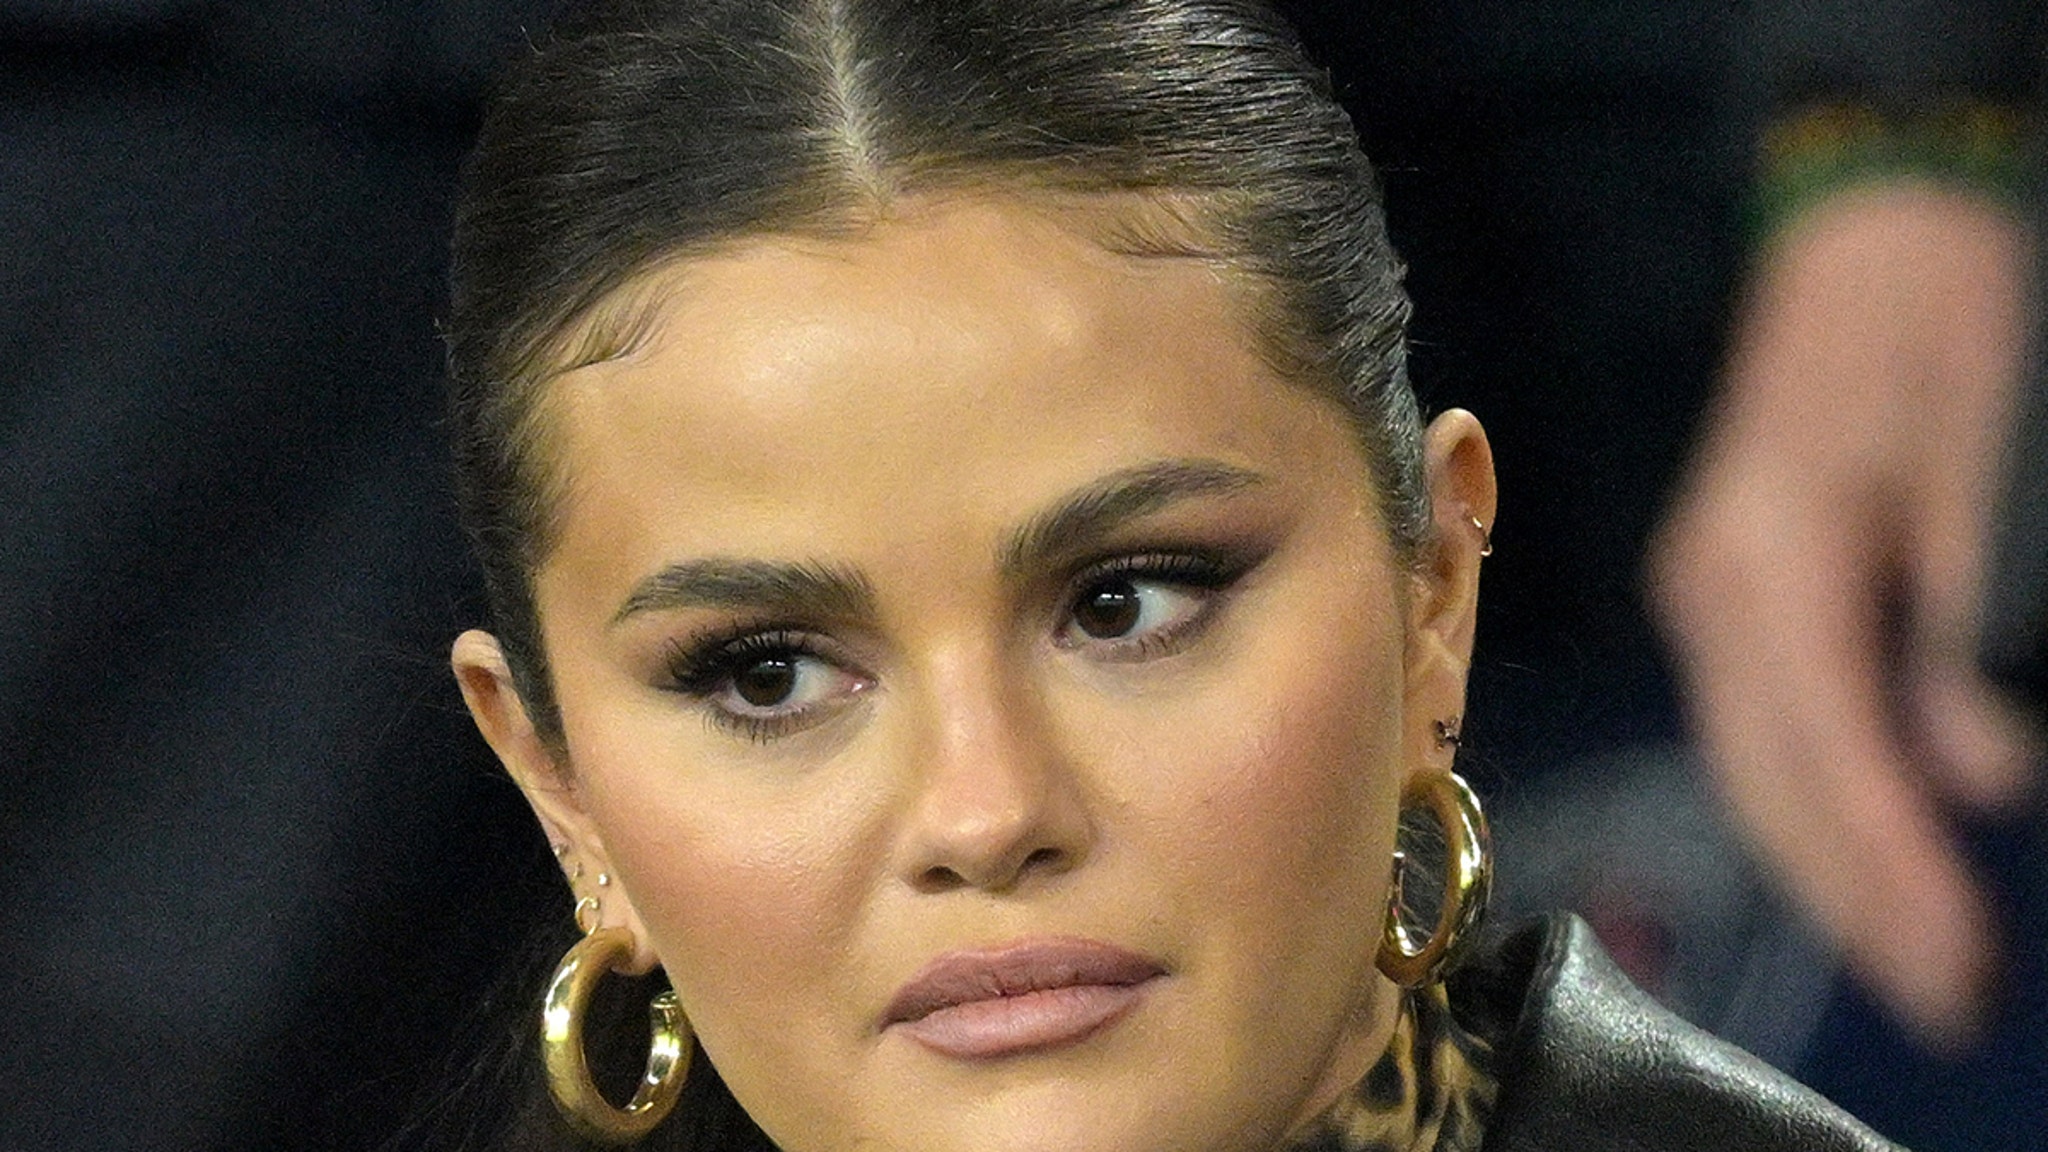 Selena Gomez deletes Instagram after being criticized for an Israeli-Palestinian post